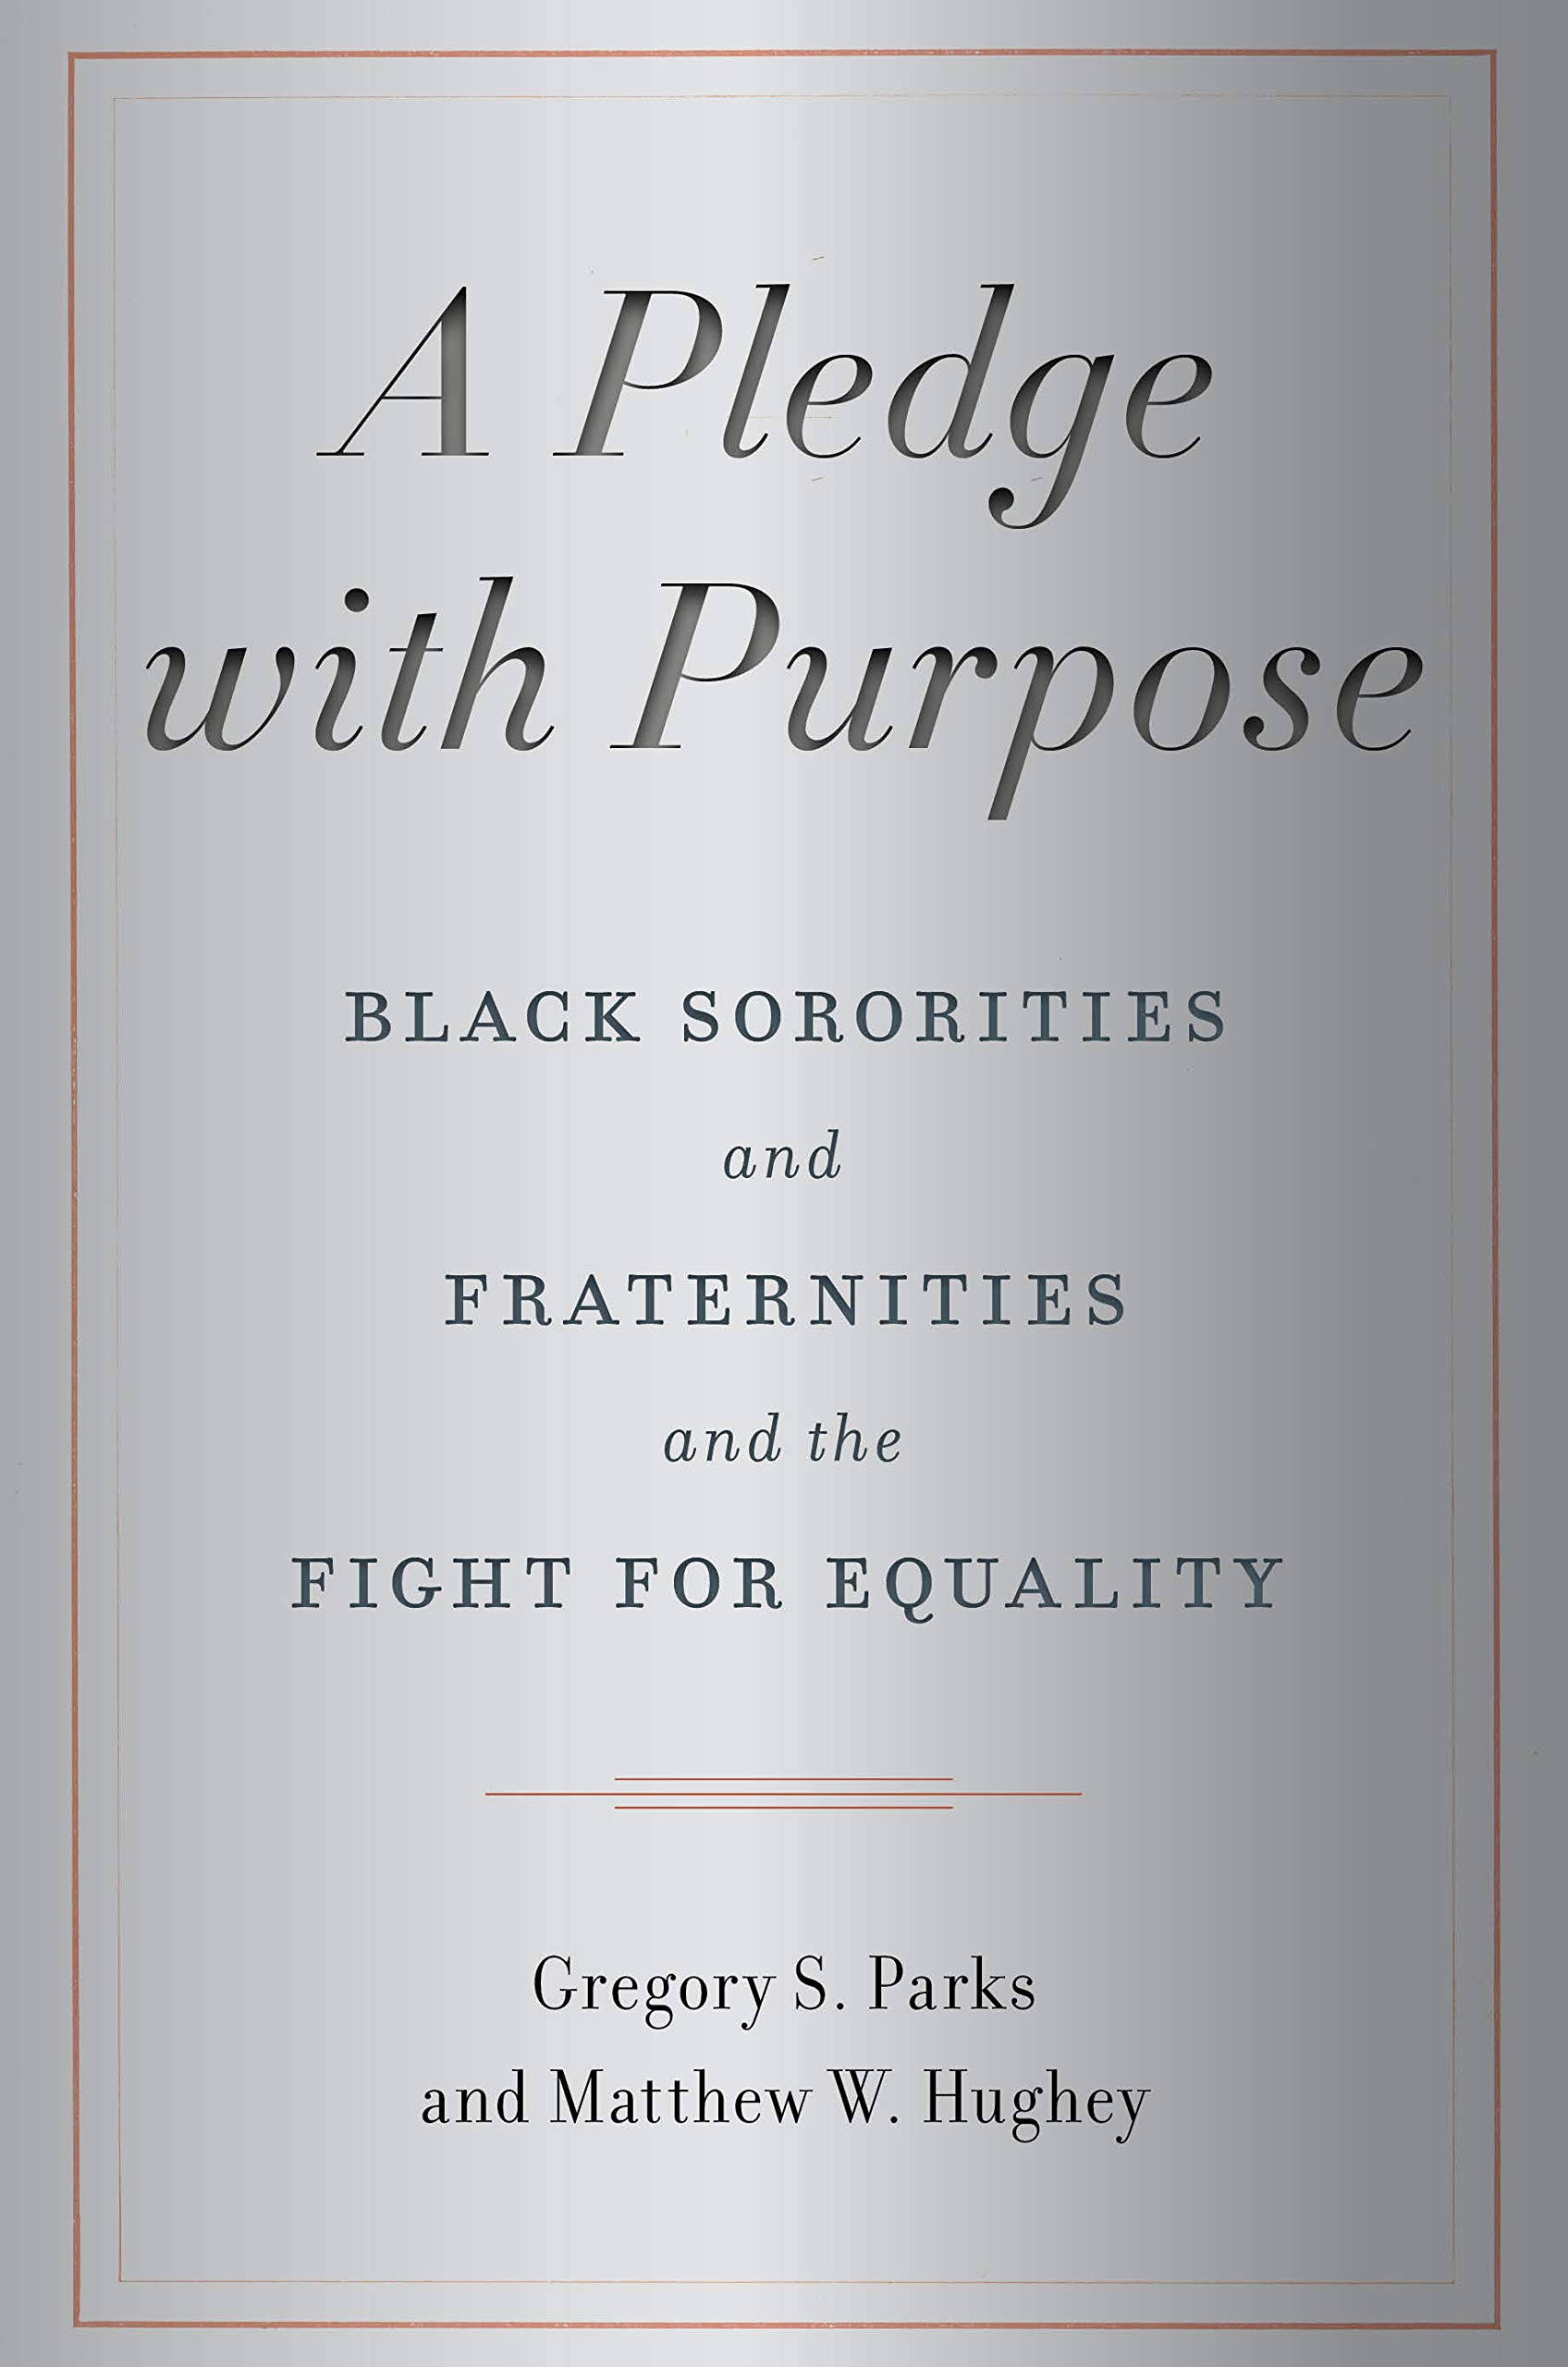 A Pledge with Purpose: Black Sororities and Fraternities and the Fight for Equality